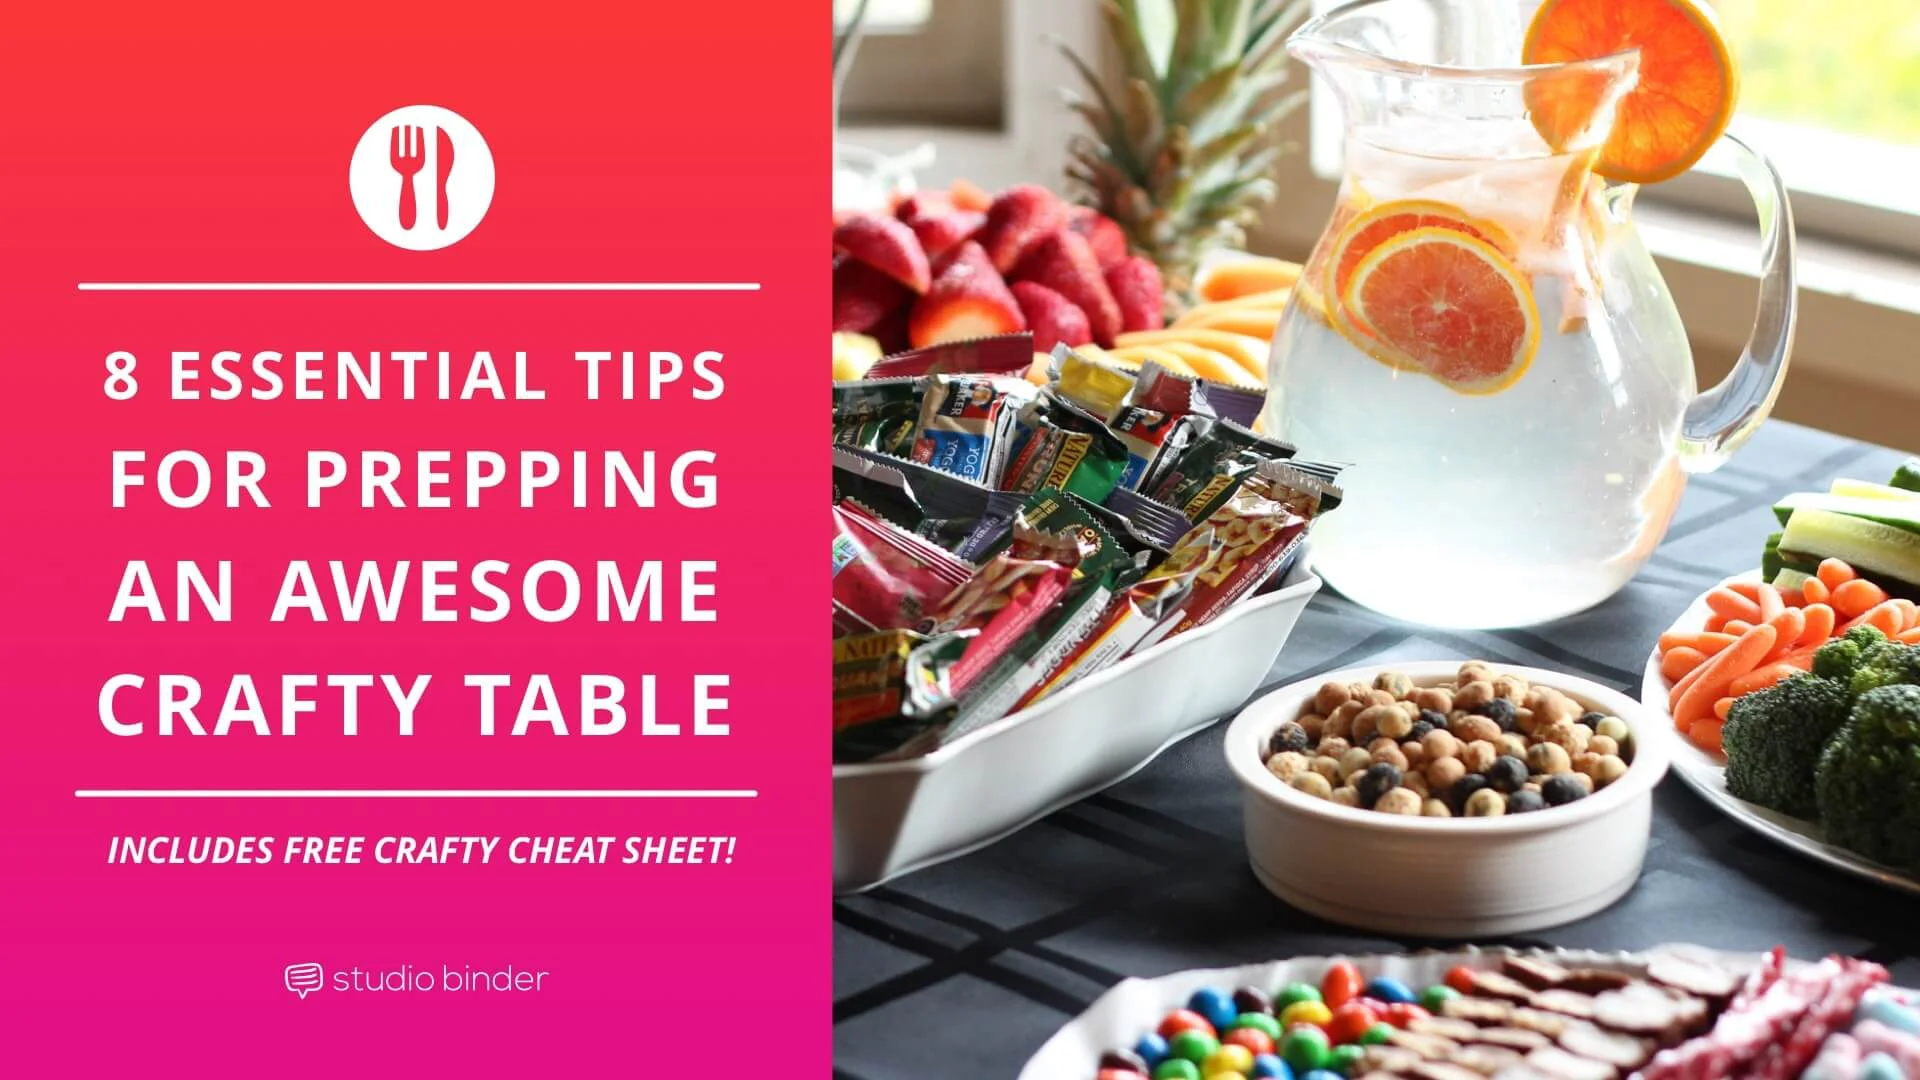 8 Essential Tips for Prepping an Awesome Craft Services Table - Social Image - StudioBinder-min